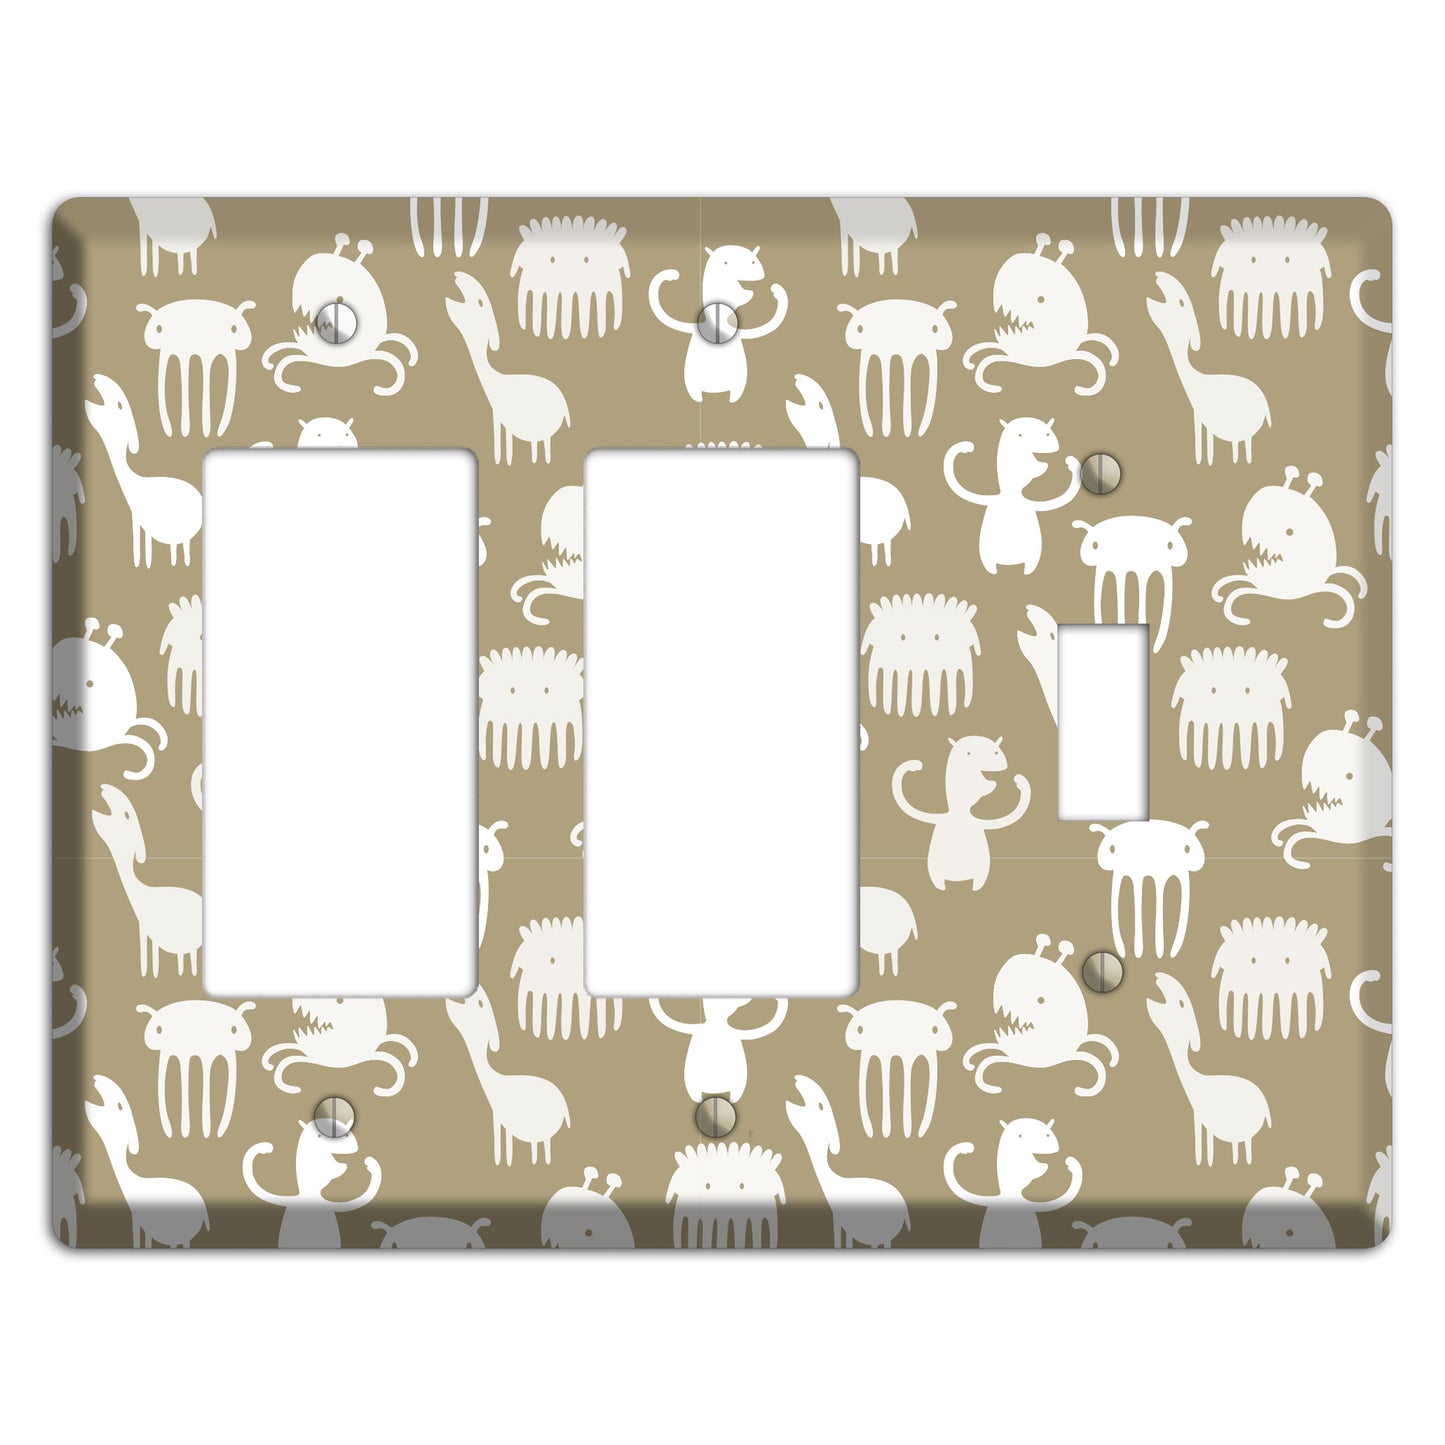 Sily Monsters Brown and White 2 Rocker / Toggle Wallplate